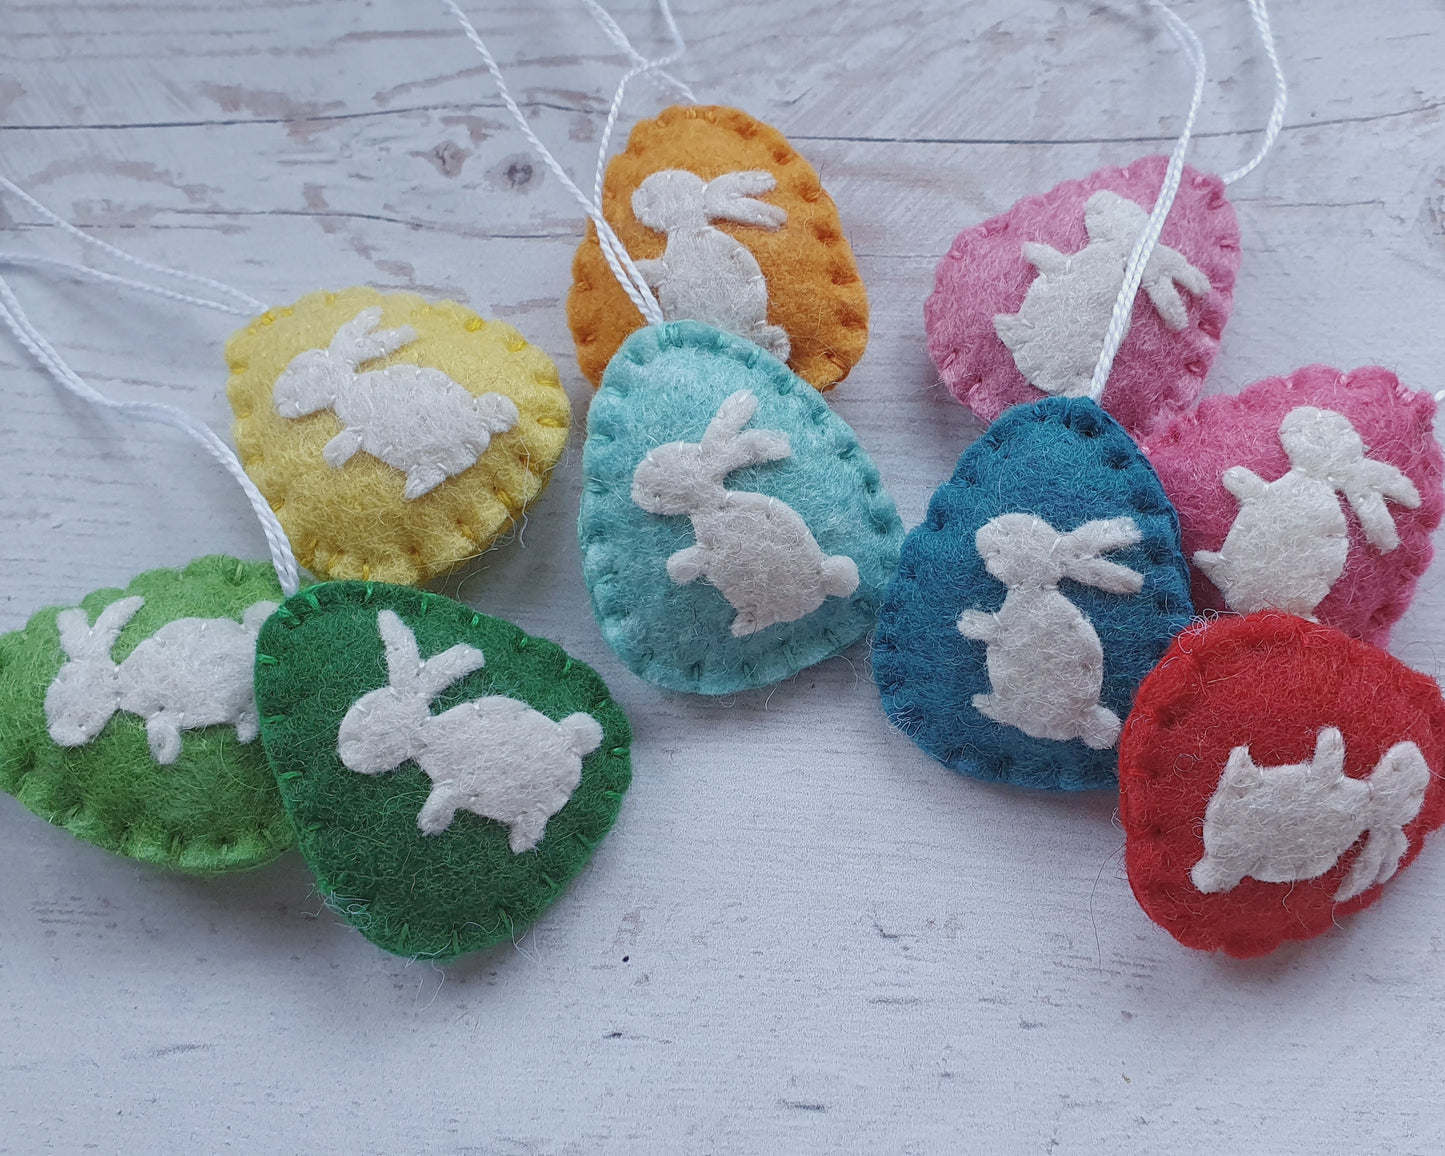 Mini Easter egg ornaments with bunny - wool felt party supplies